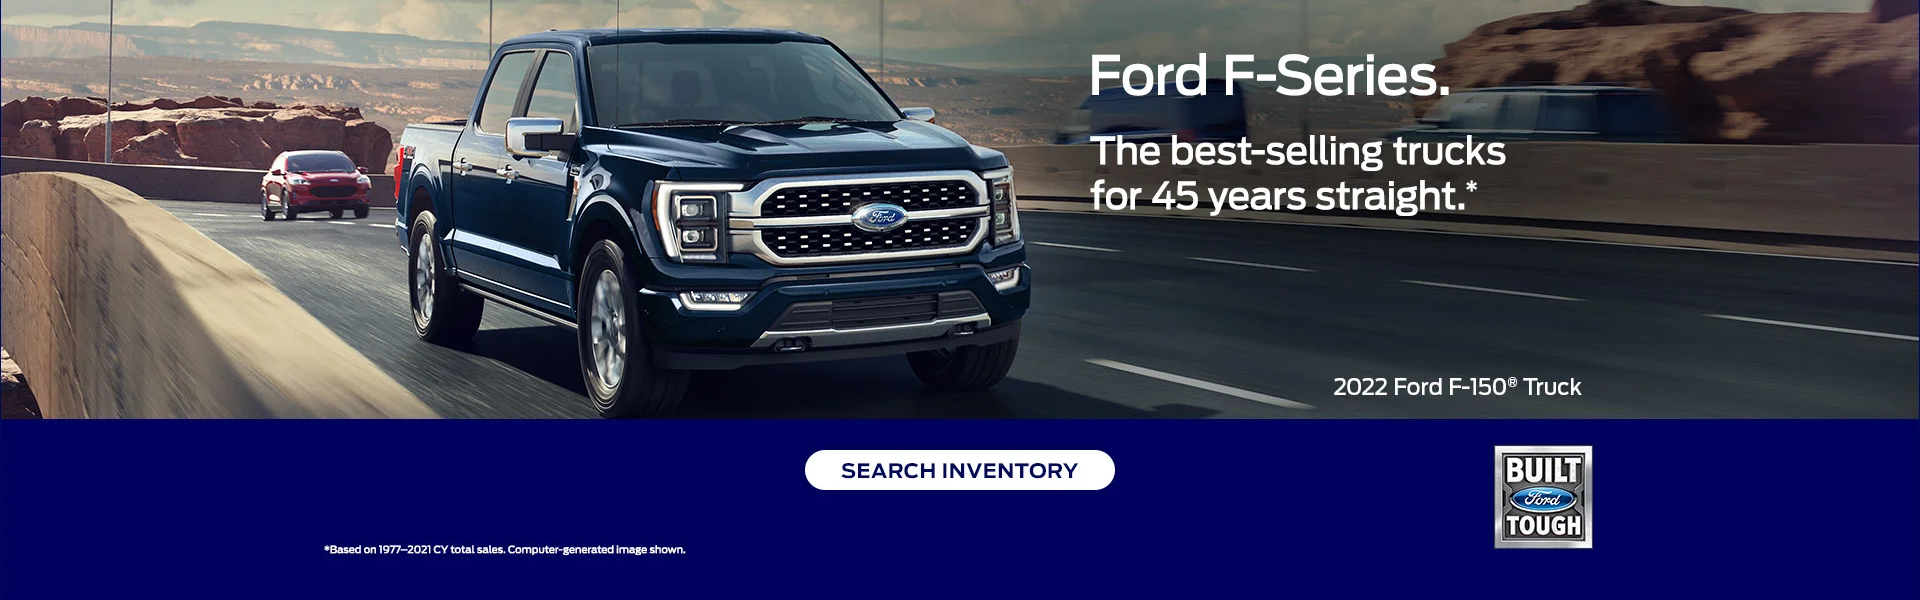 Ford F-series best selling trucks for 45 years straight